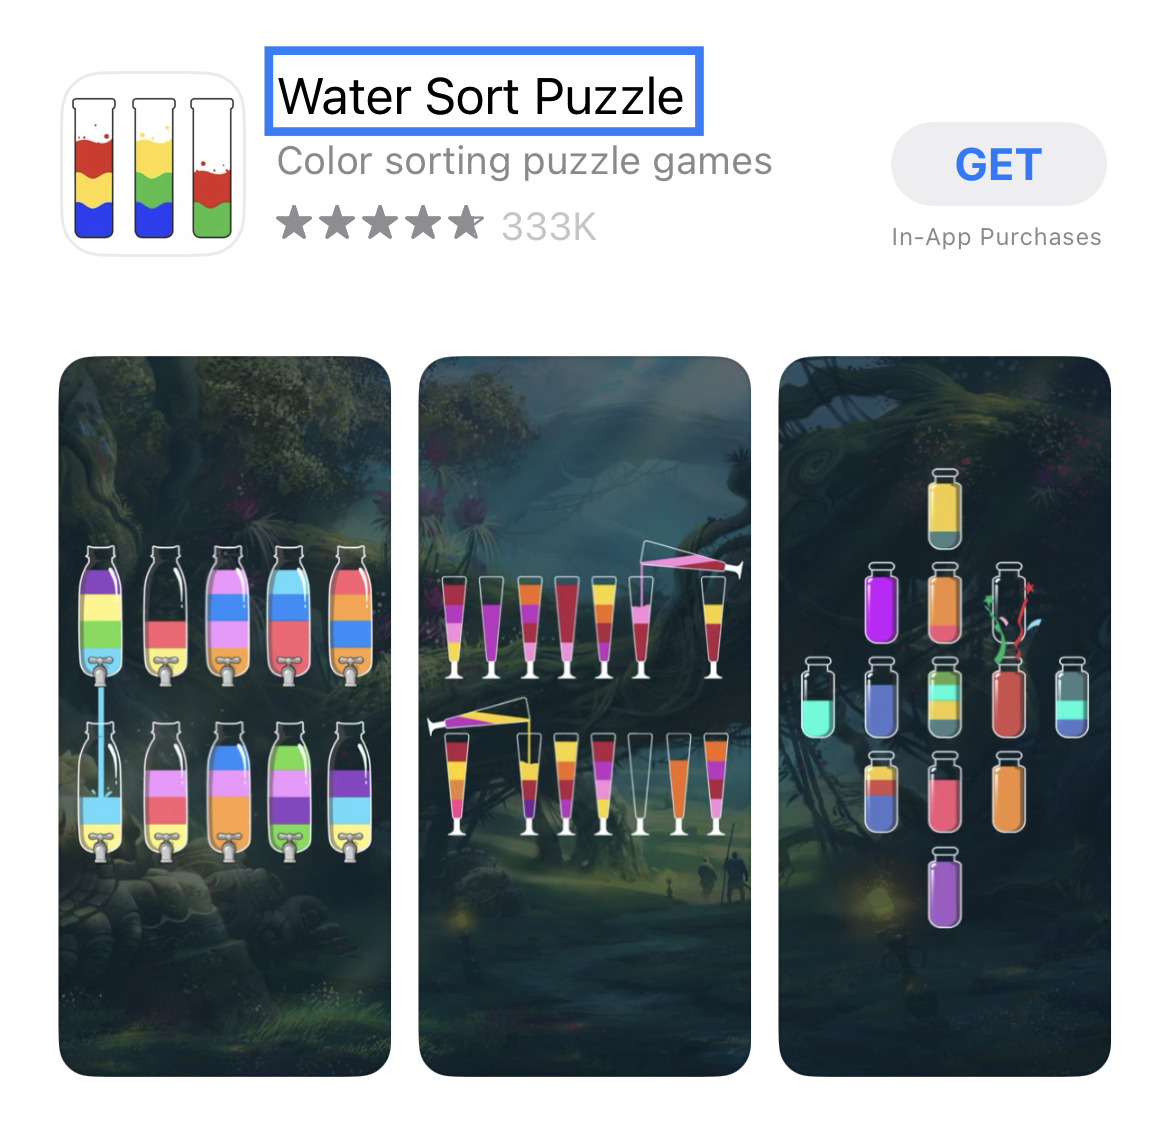 water sort puzzle game apple app store listing